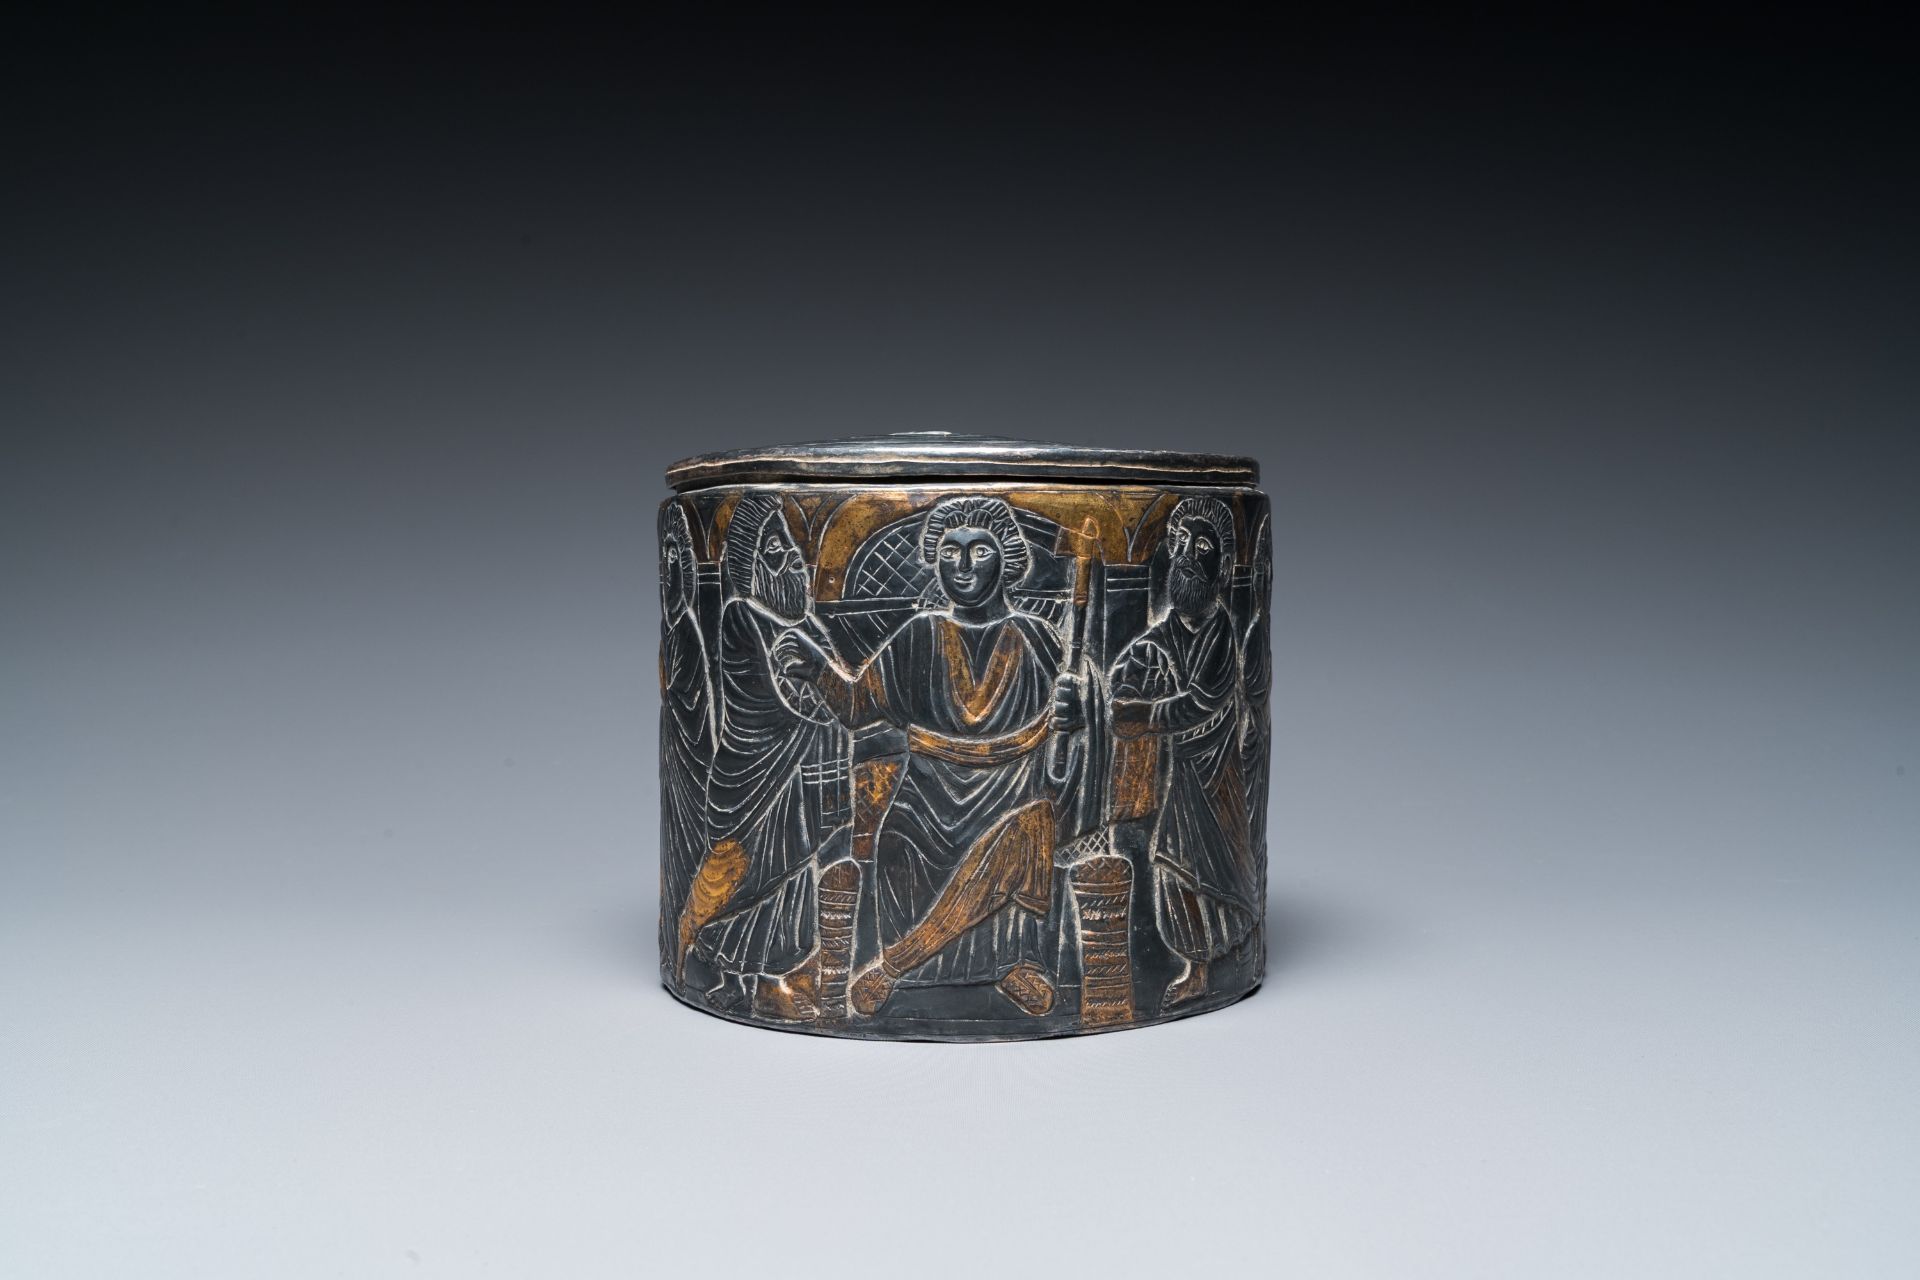 A probably Byzantine parcel-gilt silver pyxis, possibly Italy, 14th C. or later - Image 2 of 7